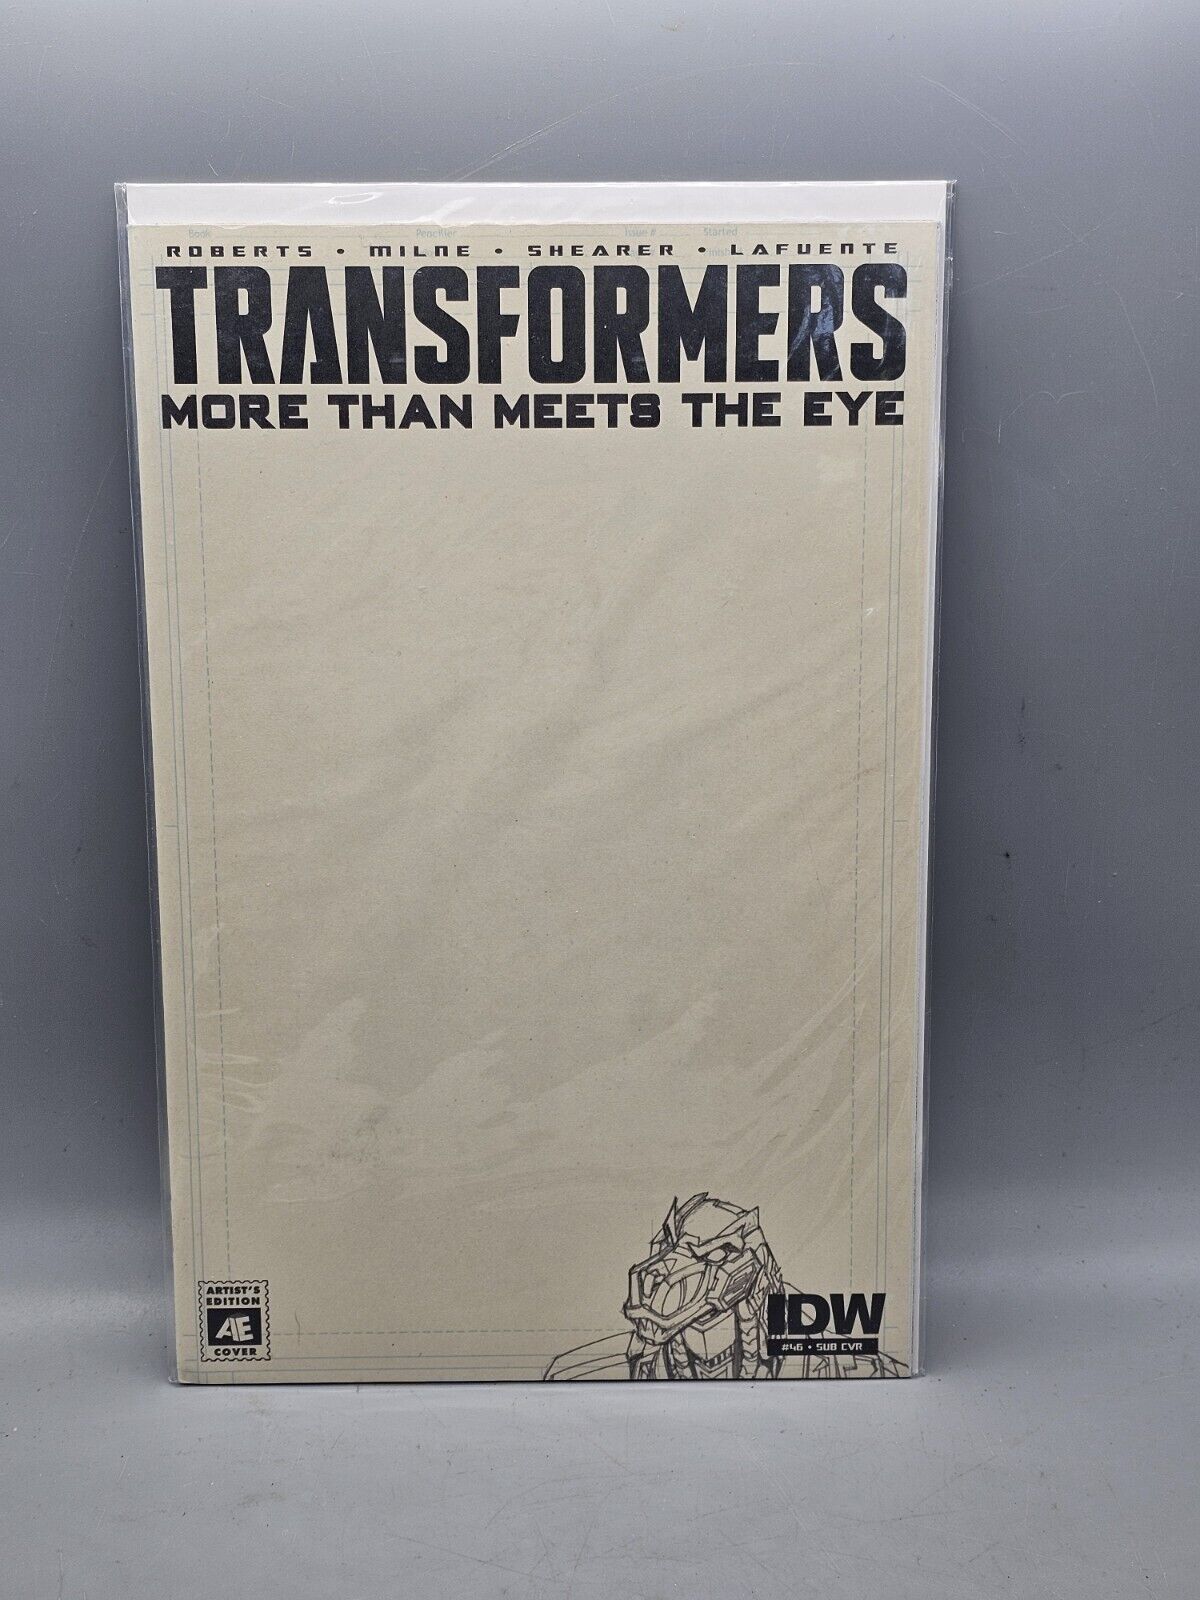 Transformers More that Meets the Eye #46 Variant Blank Cover Artist Comic-Con